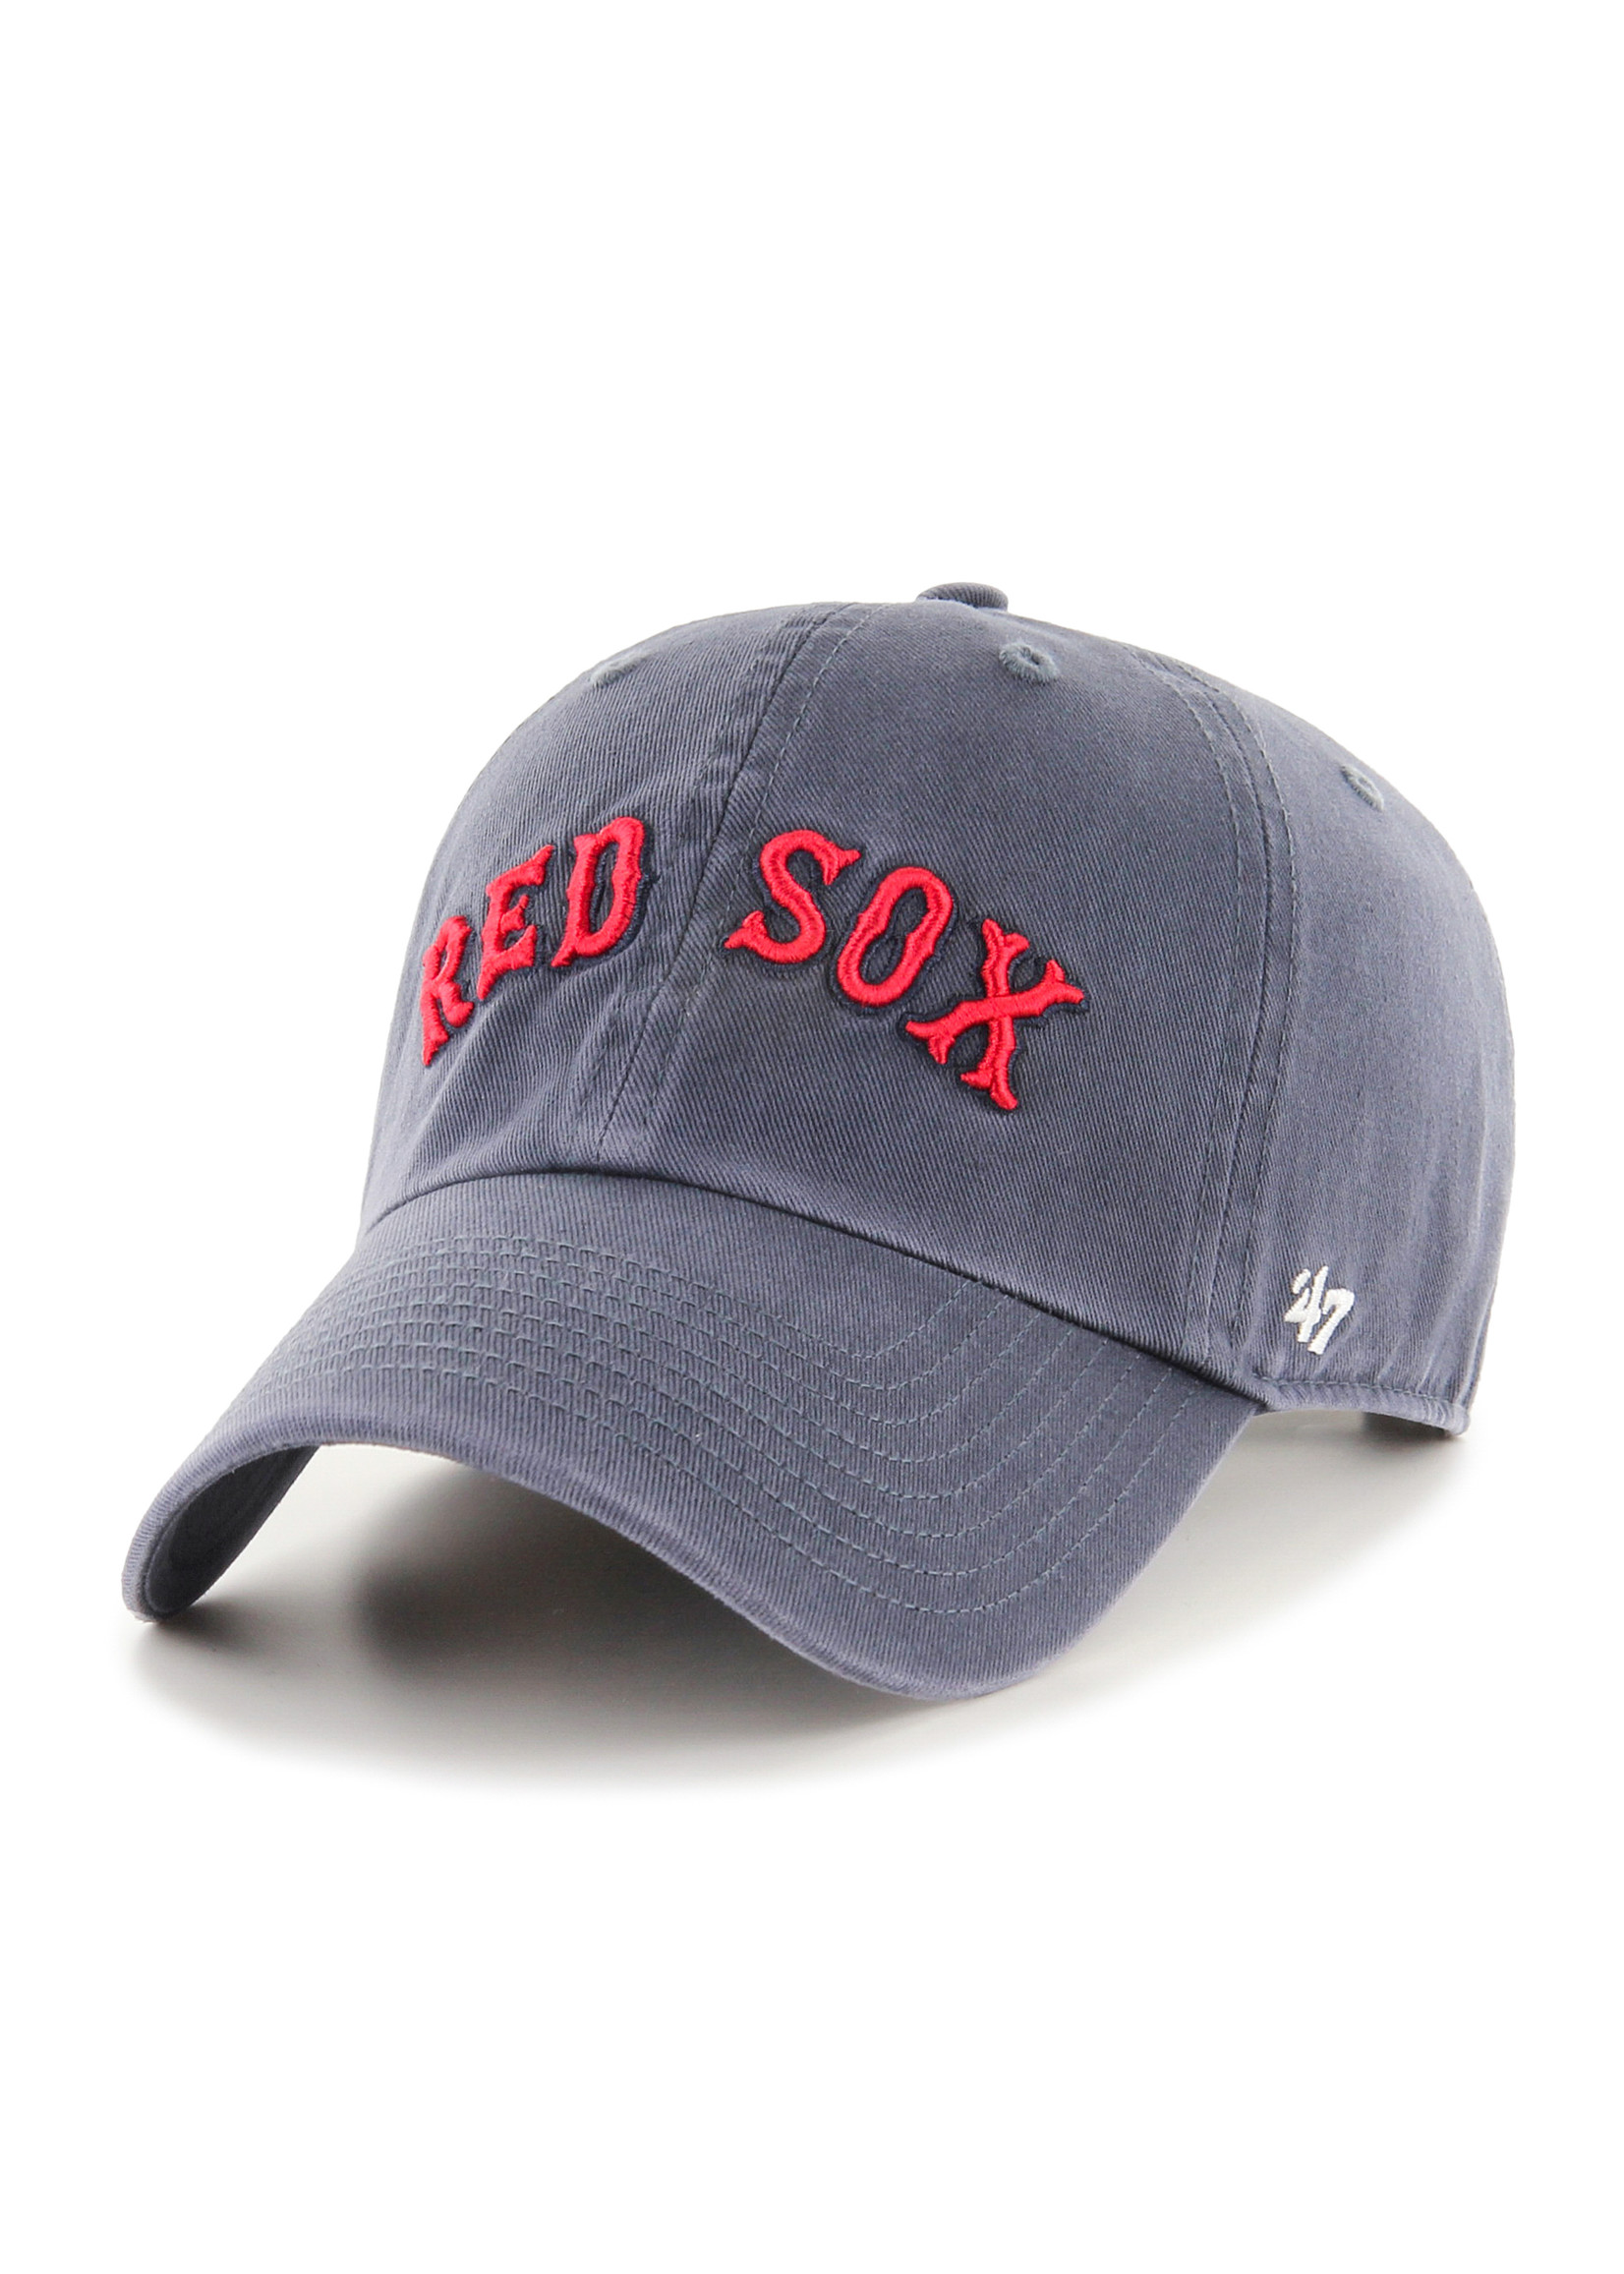 '47 Brand Boston Red Sox Adjustable Clean Up hat